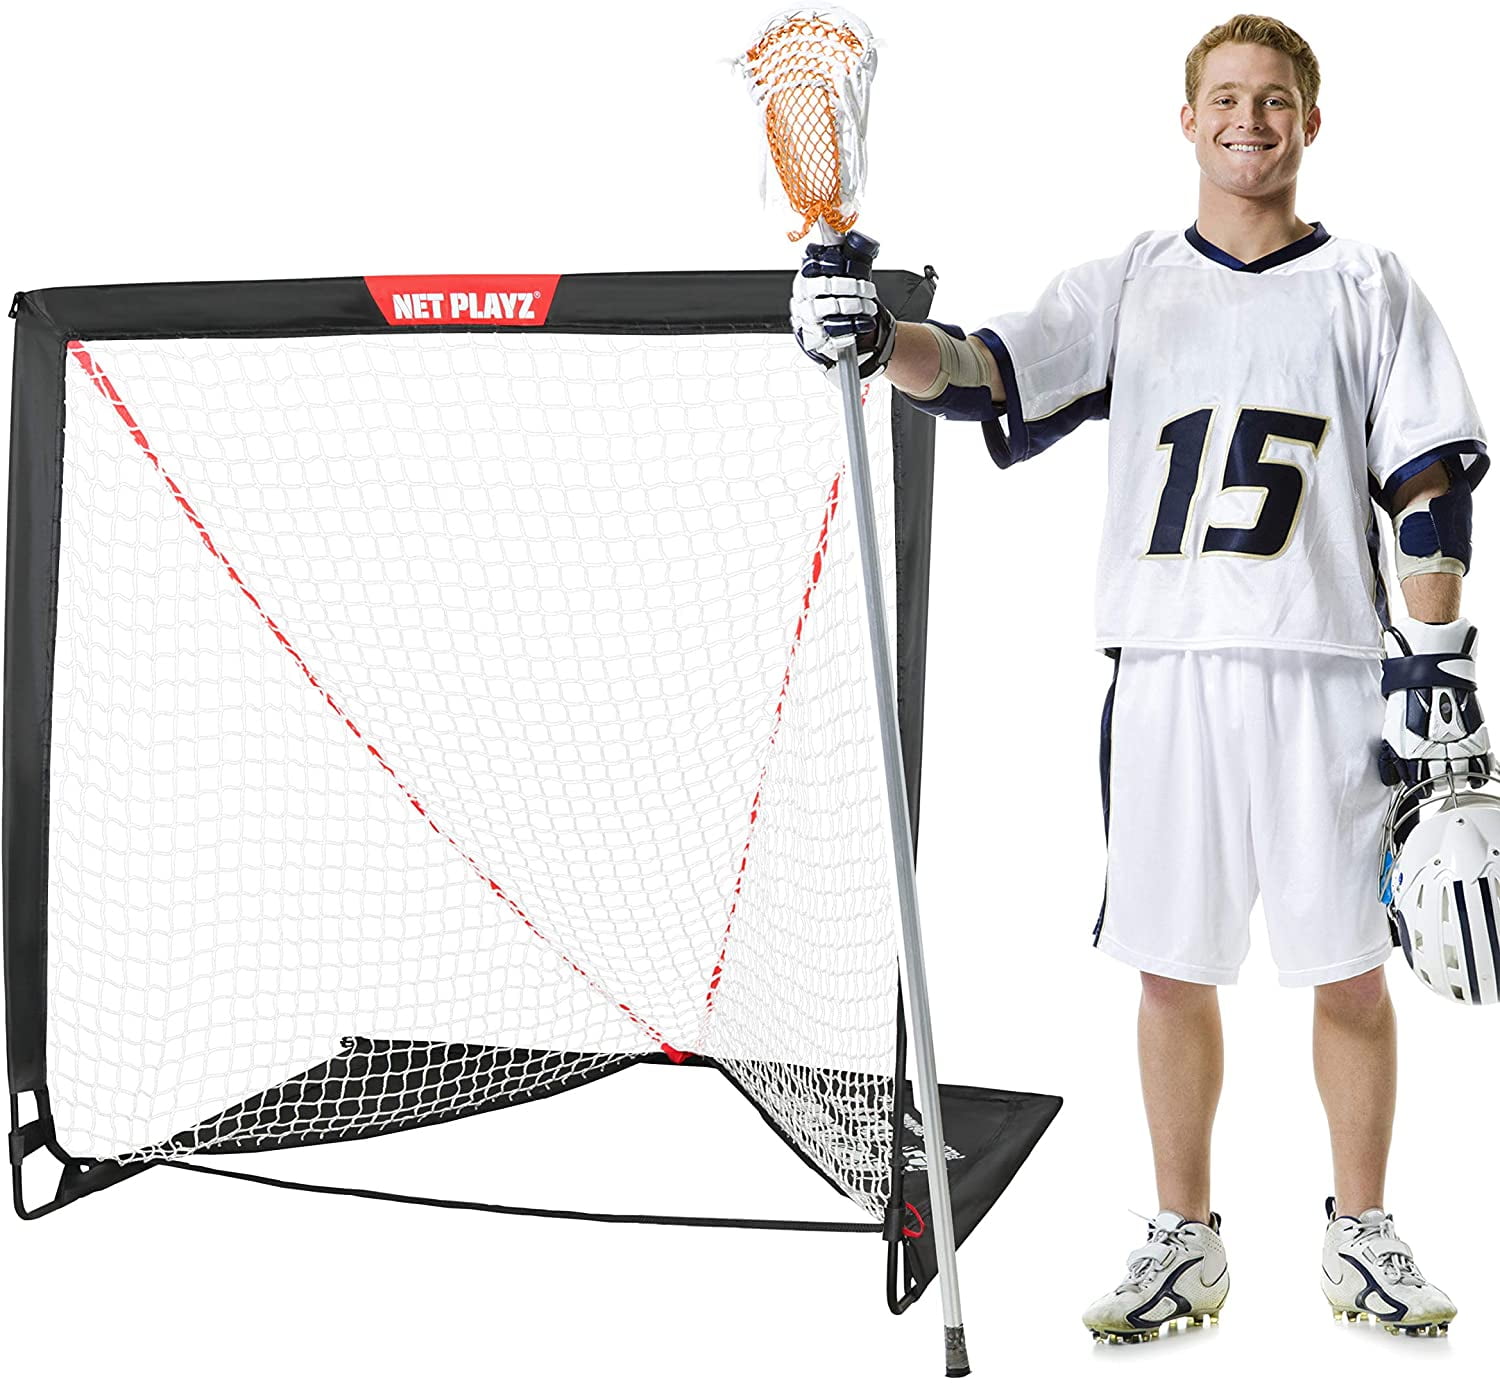 Lacrosse Portable Goal,Lacrosse Sticks and Net With Perfect Display Size Folding Lacrosse Goal,A Second Folding Lacrosse Net,Lacrosse Goal Target,Lax Goal With High Quality materials Children Lacrosse Net,Lacrosse Goal Cover,Lacrosse Sticks and Net,Lacro 